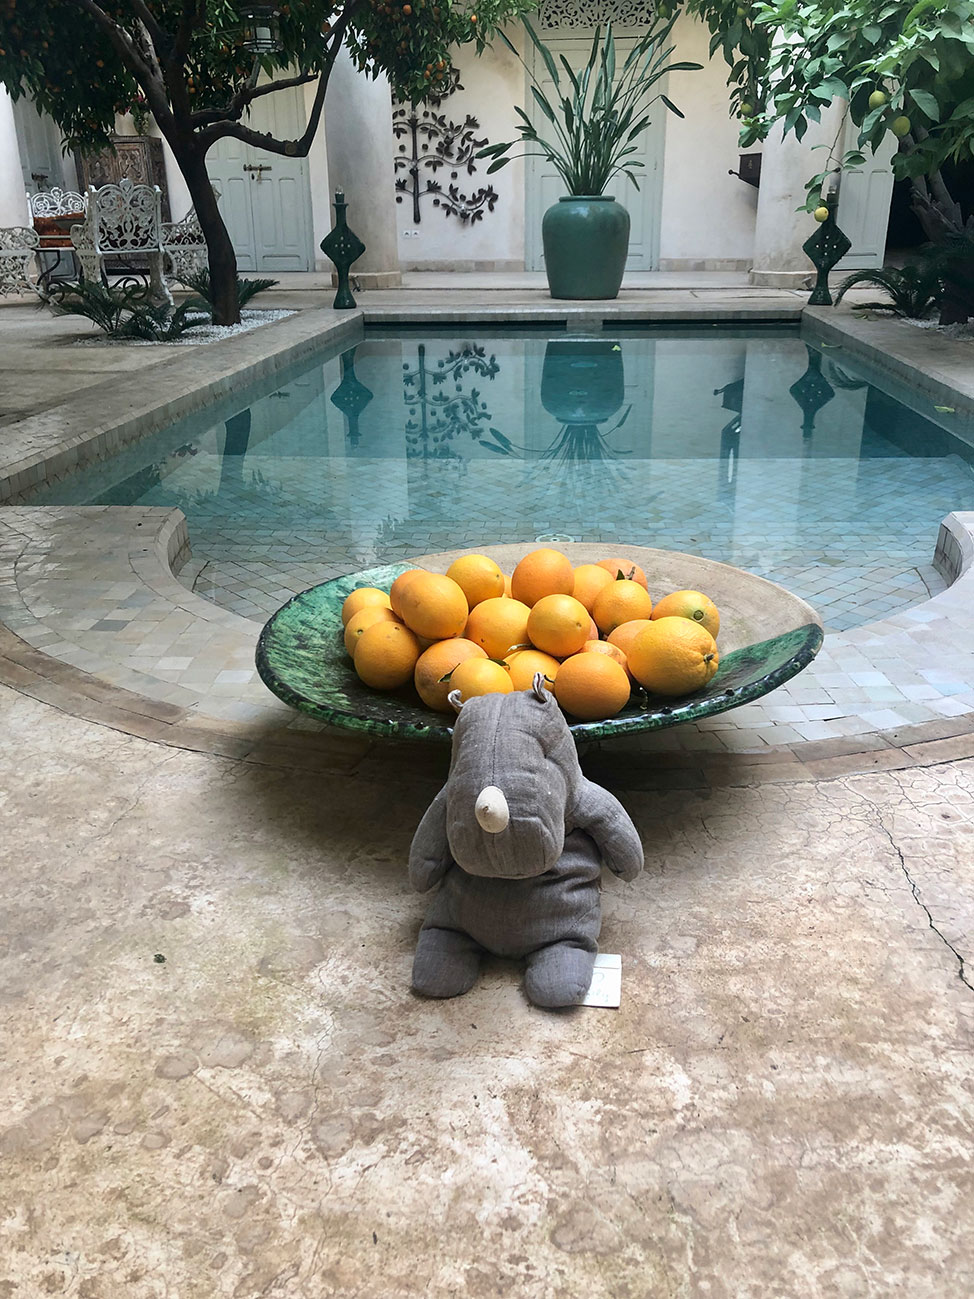 A bowl of fresh oranges sits at the head of the riad's blue tiled pool.